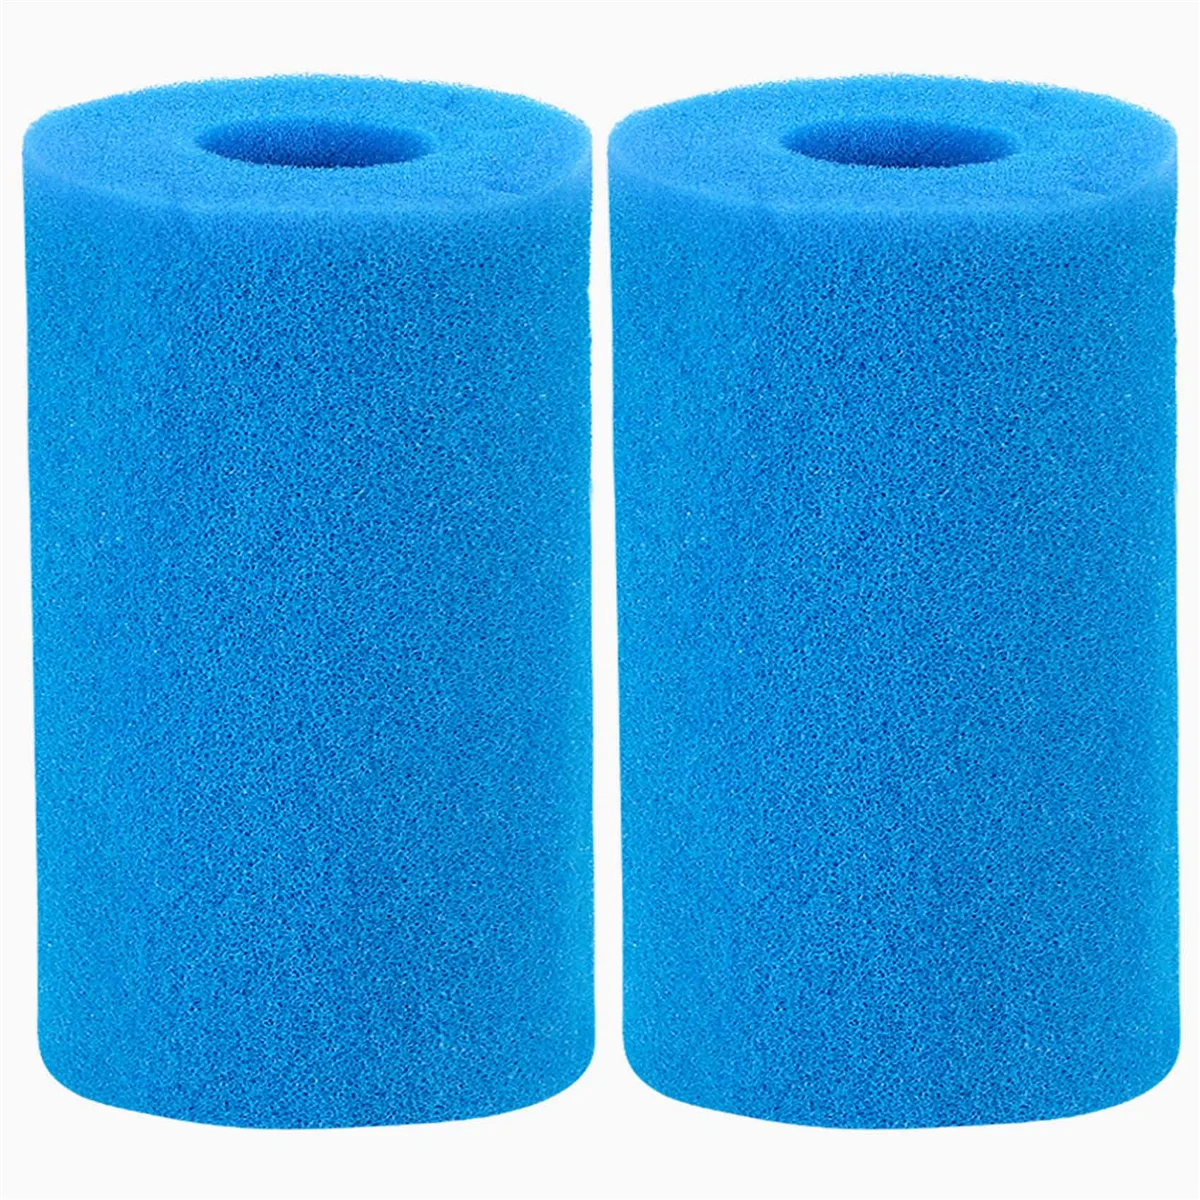 

Type B Washable Pool Sponge Filter, Reusable Swimming Cartridge Foam Filter for Compatible with In-Tex Type B (2 Pcs)